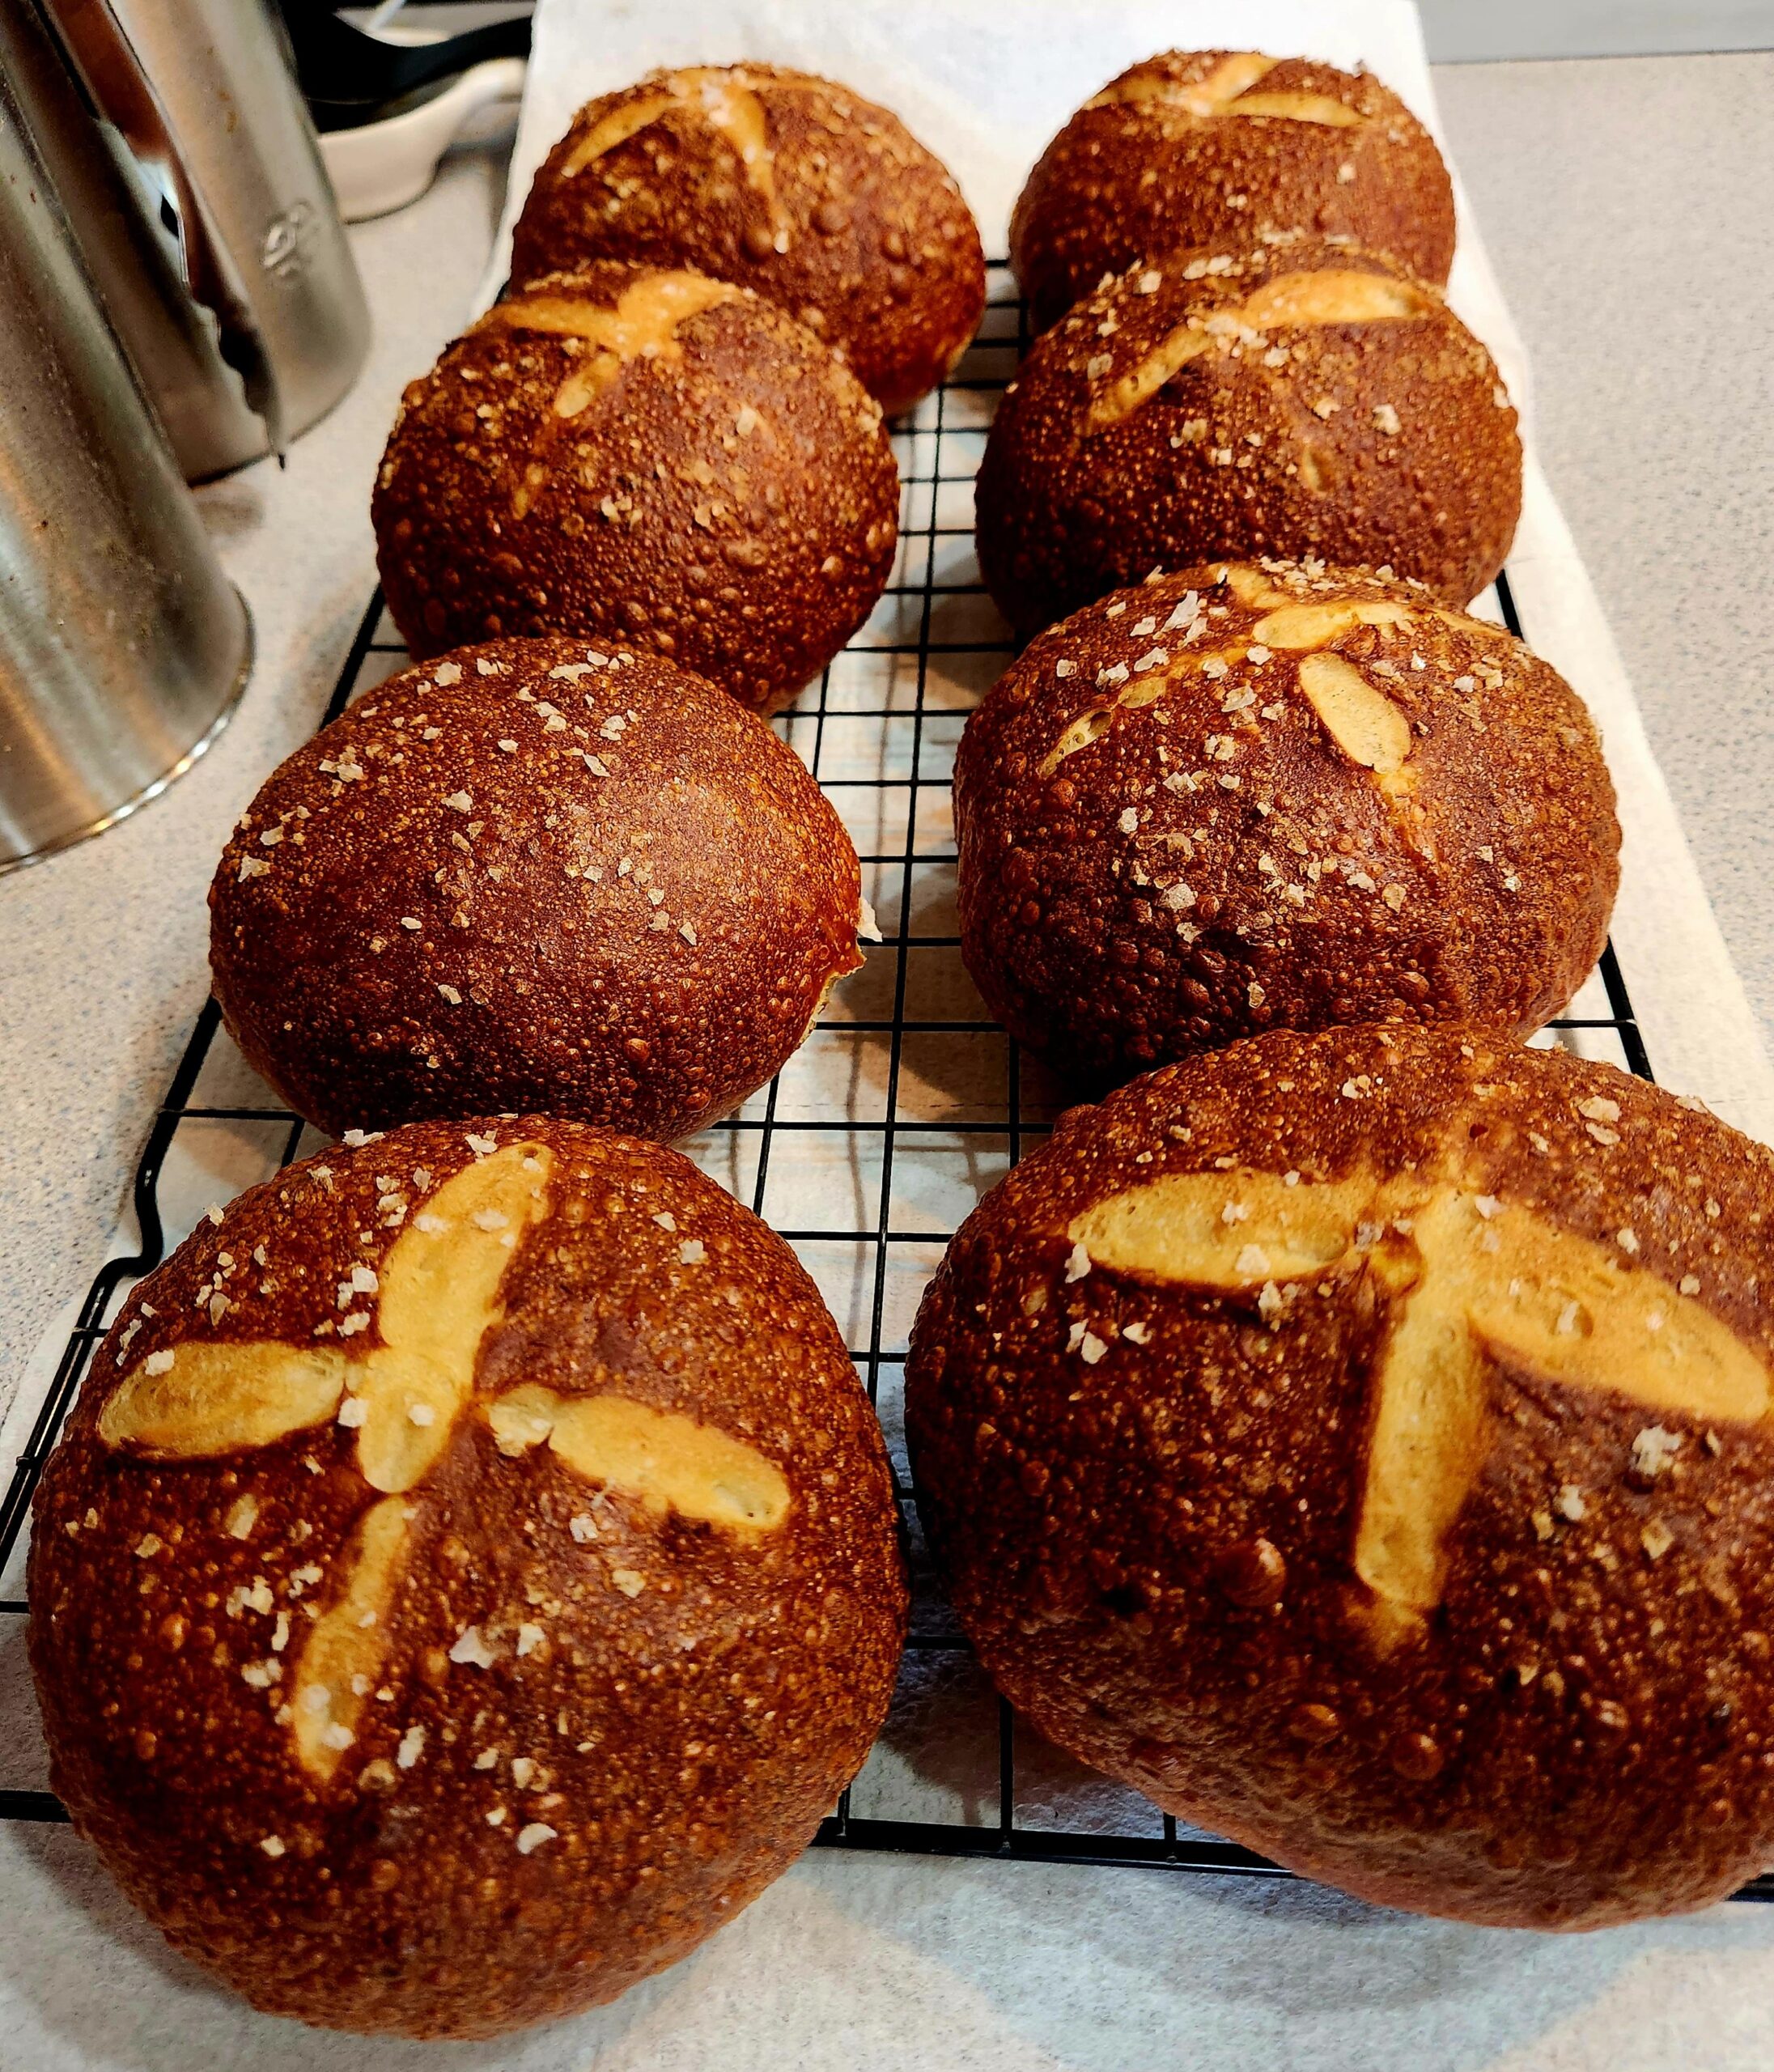 Set up-it-yourself Pretzel Buns for Beer Cheddar Smothered Smoked Pork Sandwiches!